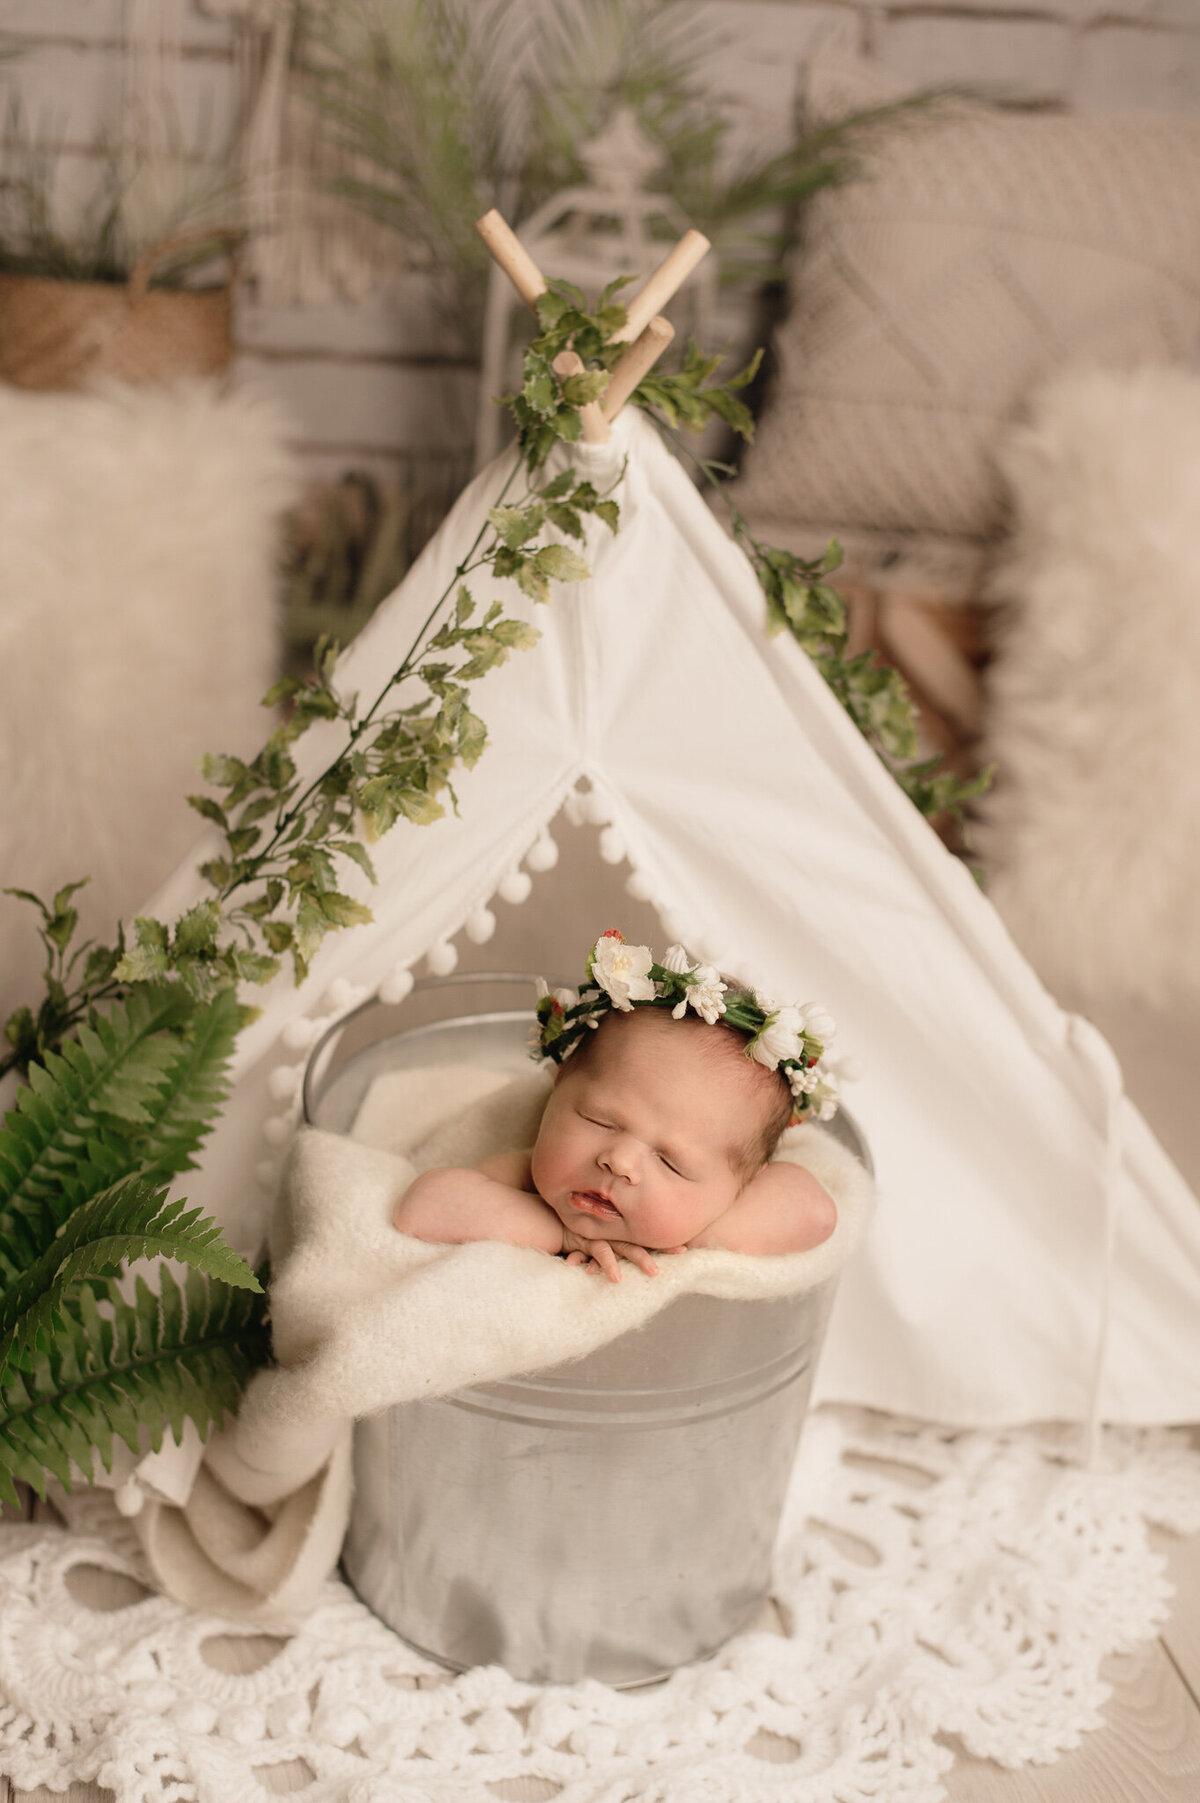 Baby girl in floral halo sleeping in a bucket in a teepee in studio.